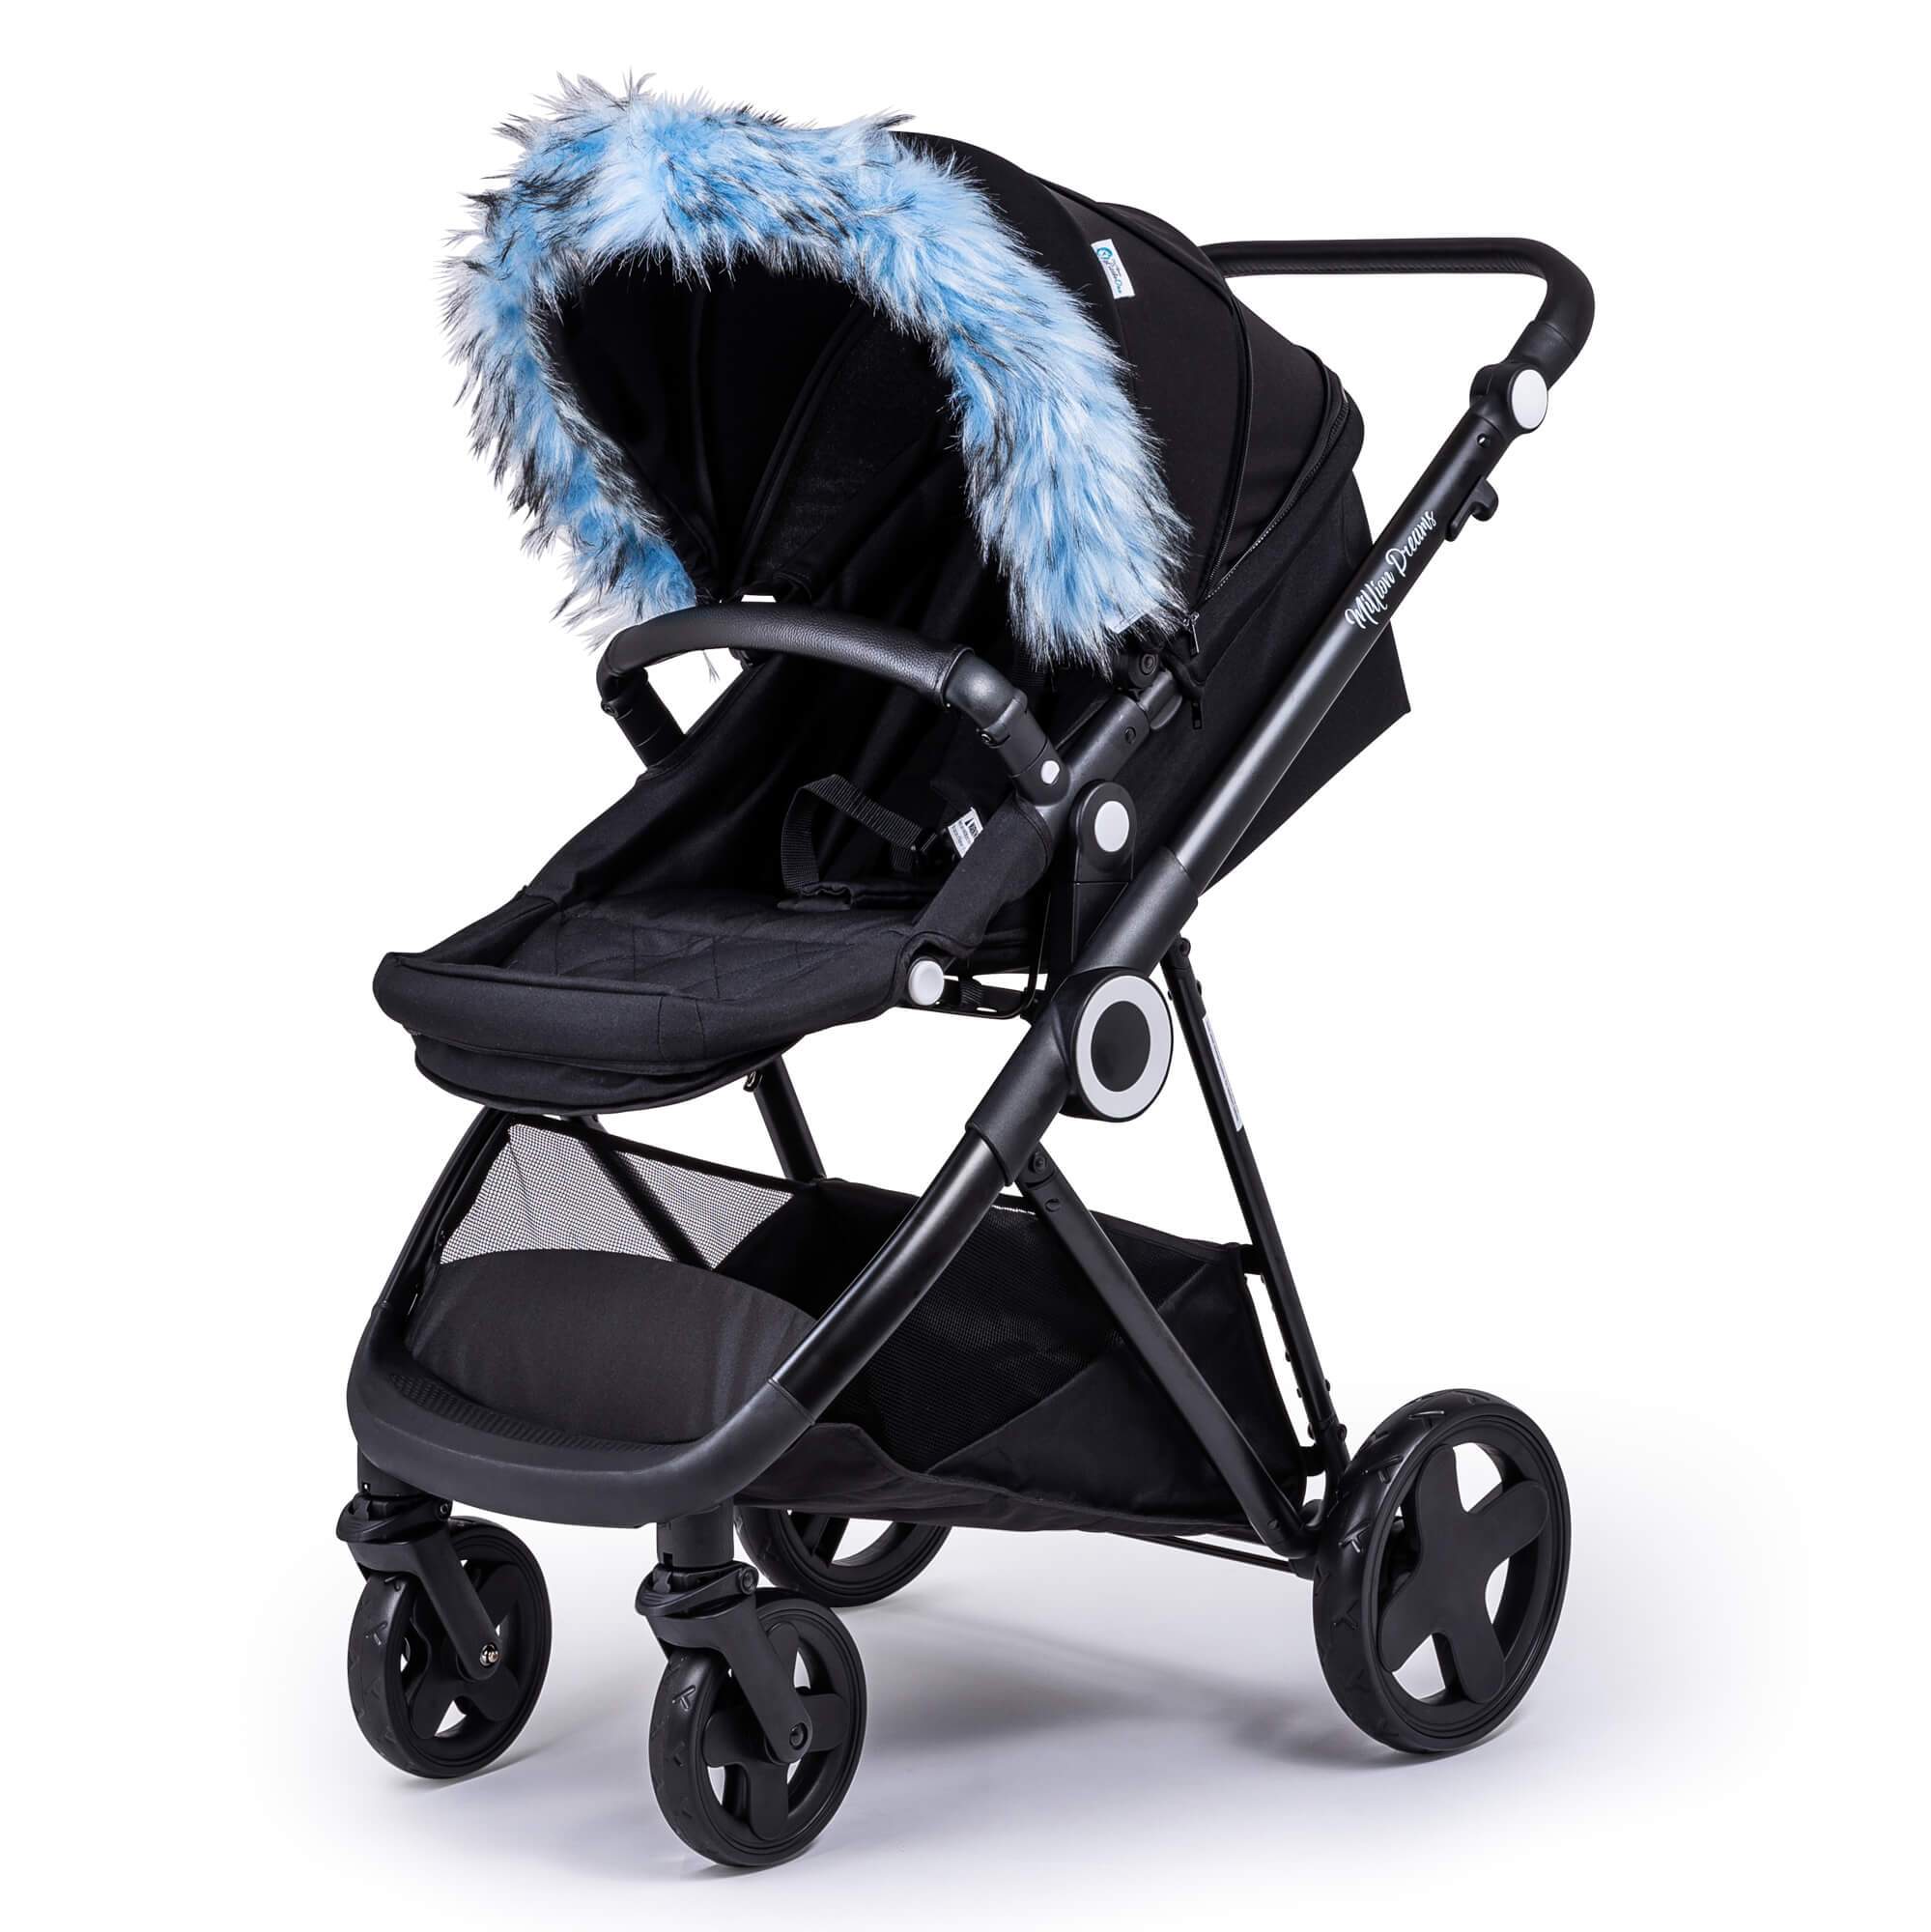 Pram Fur Hood Trim Attachment for Pushchair Compatible with Formula - Light Blue / Fits All Models | For Your Little One